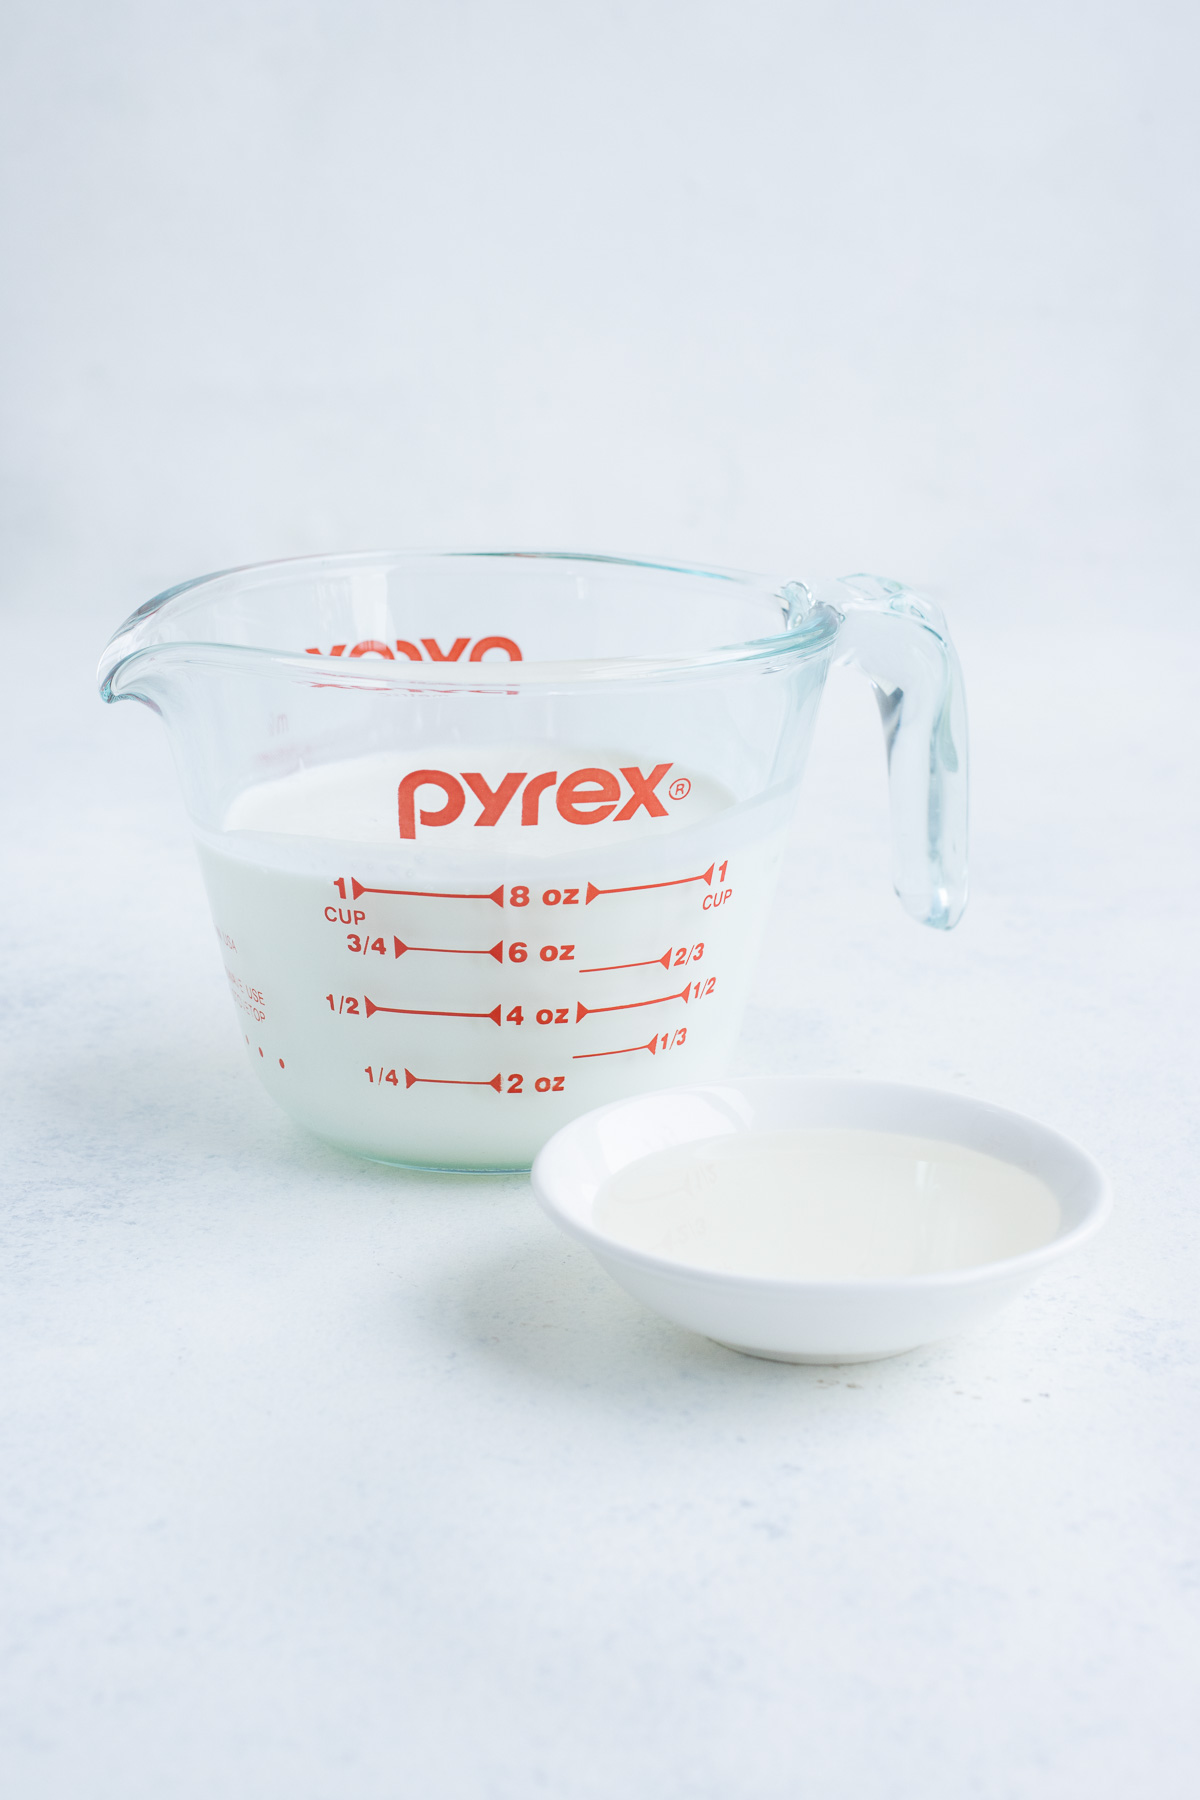 Milk in a glass measuring cup with a white bowl of vinegar on the side.